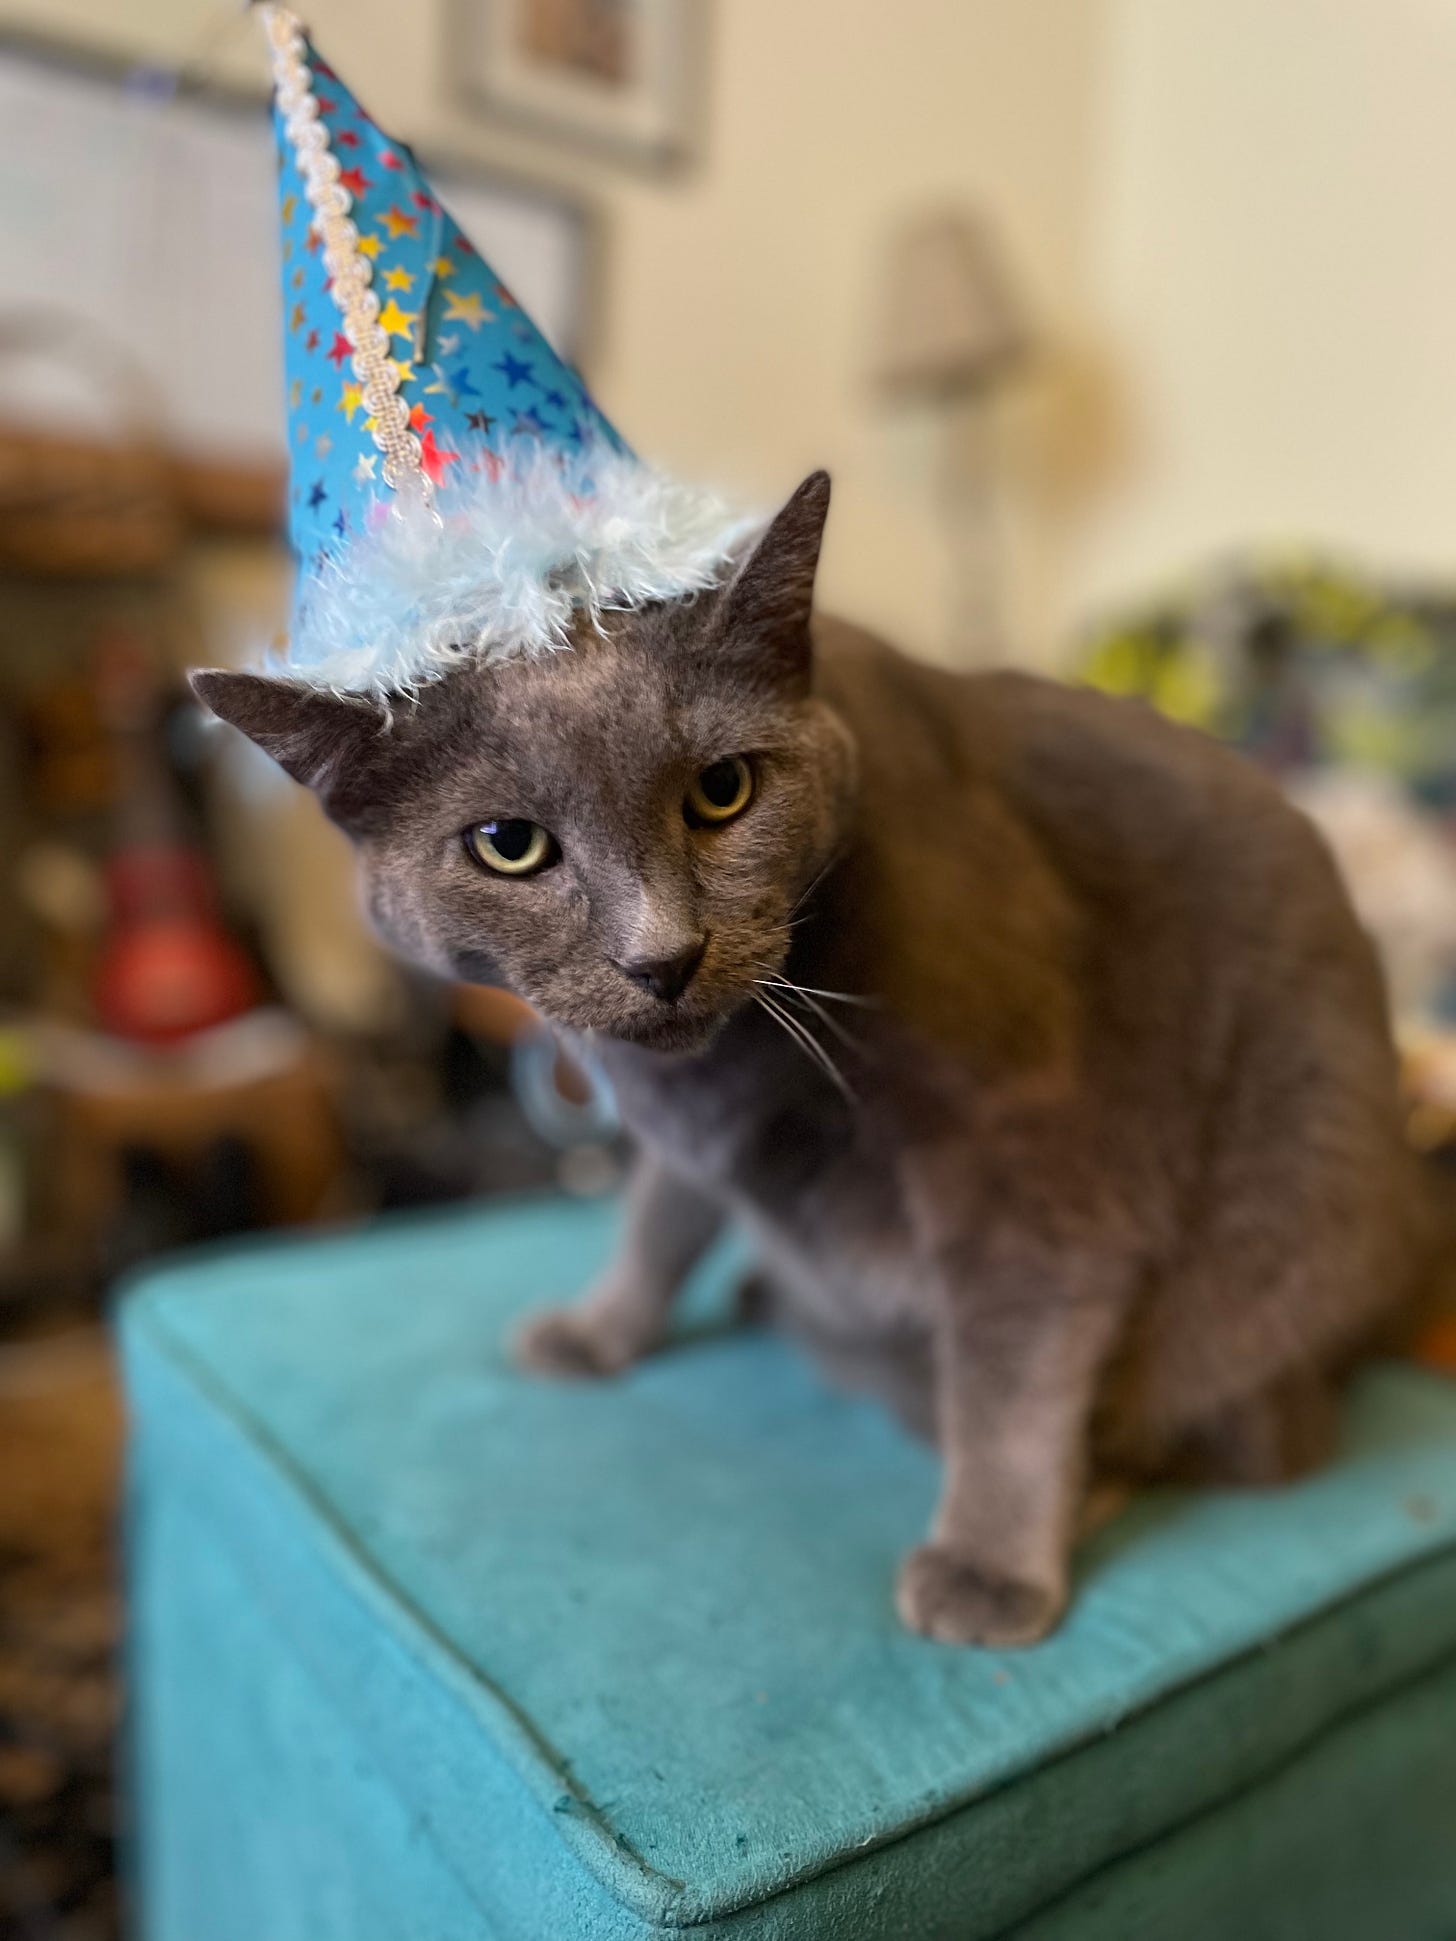 General Smedley Butler, seen here with the same party hat as before. He has an angry look on his face. 